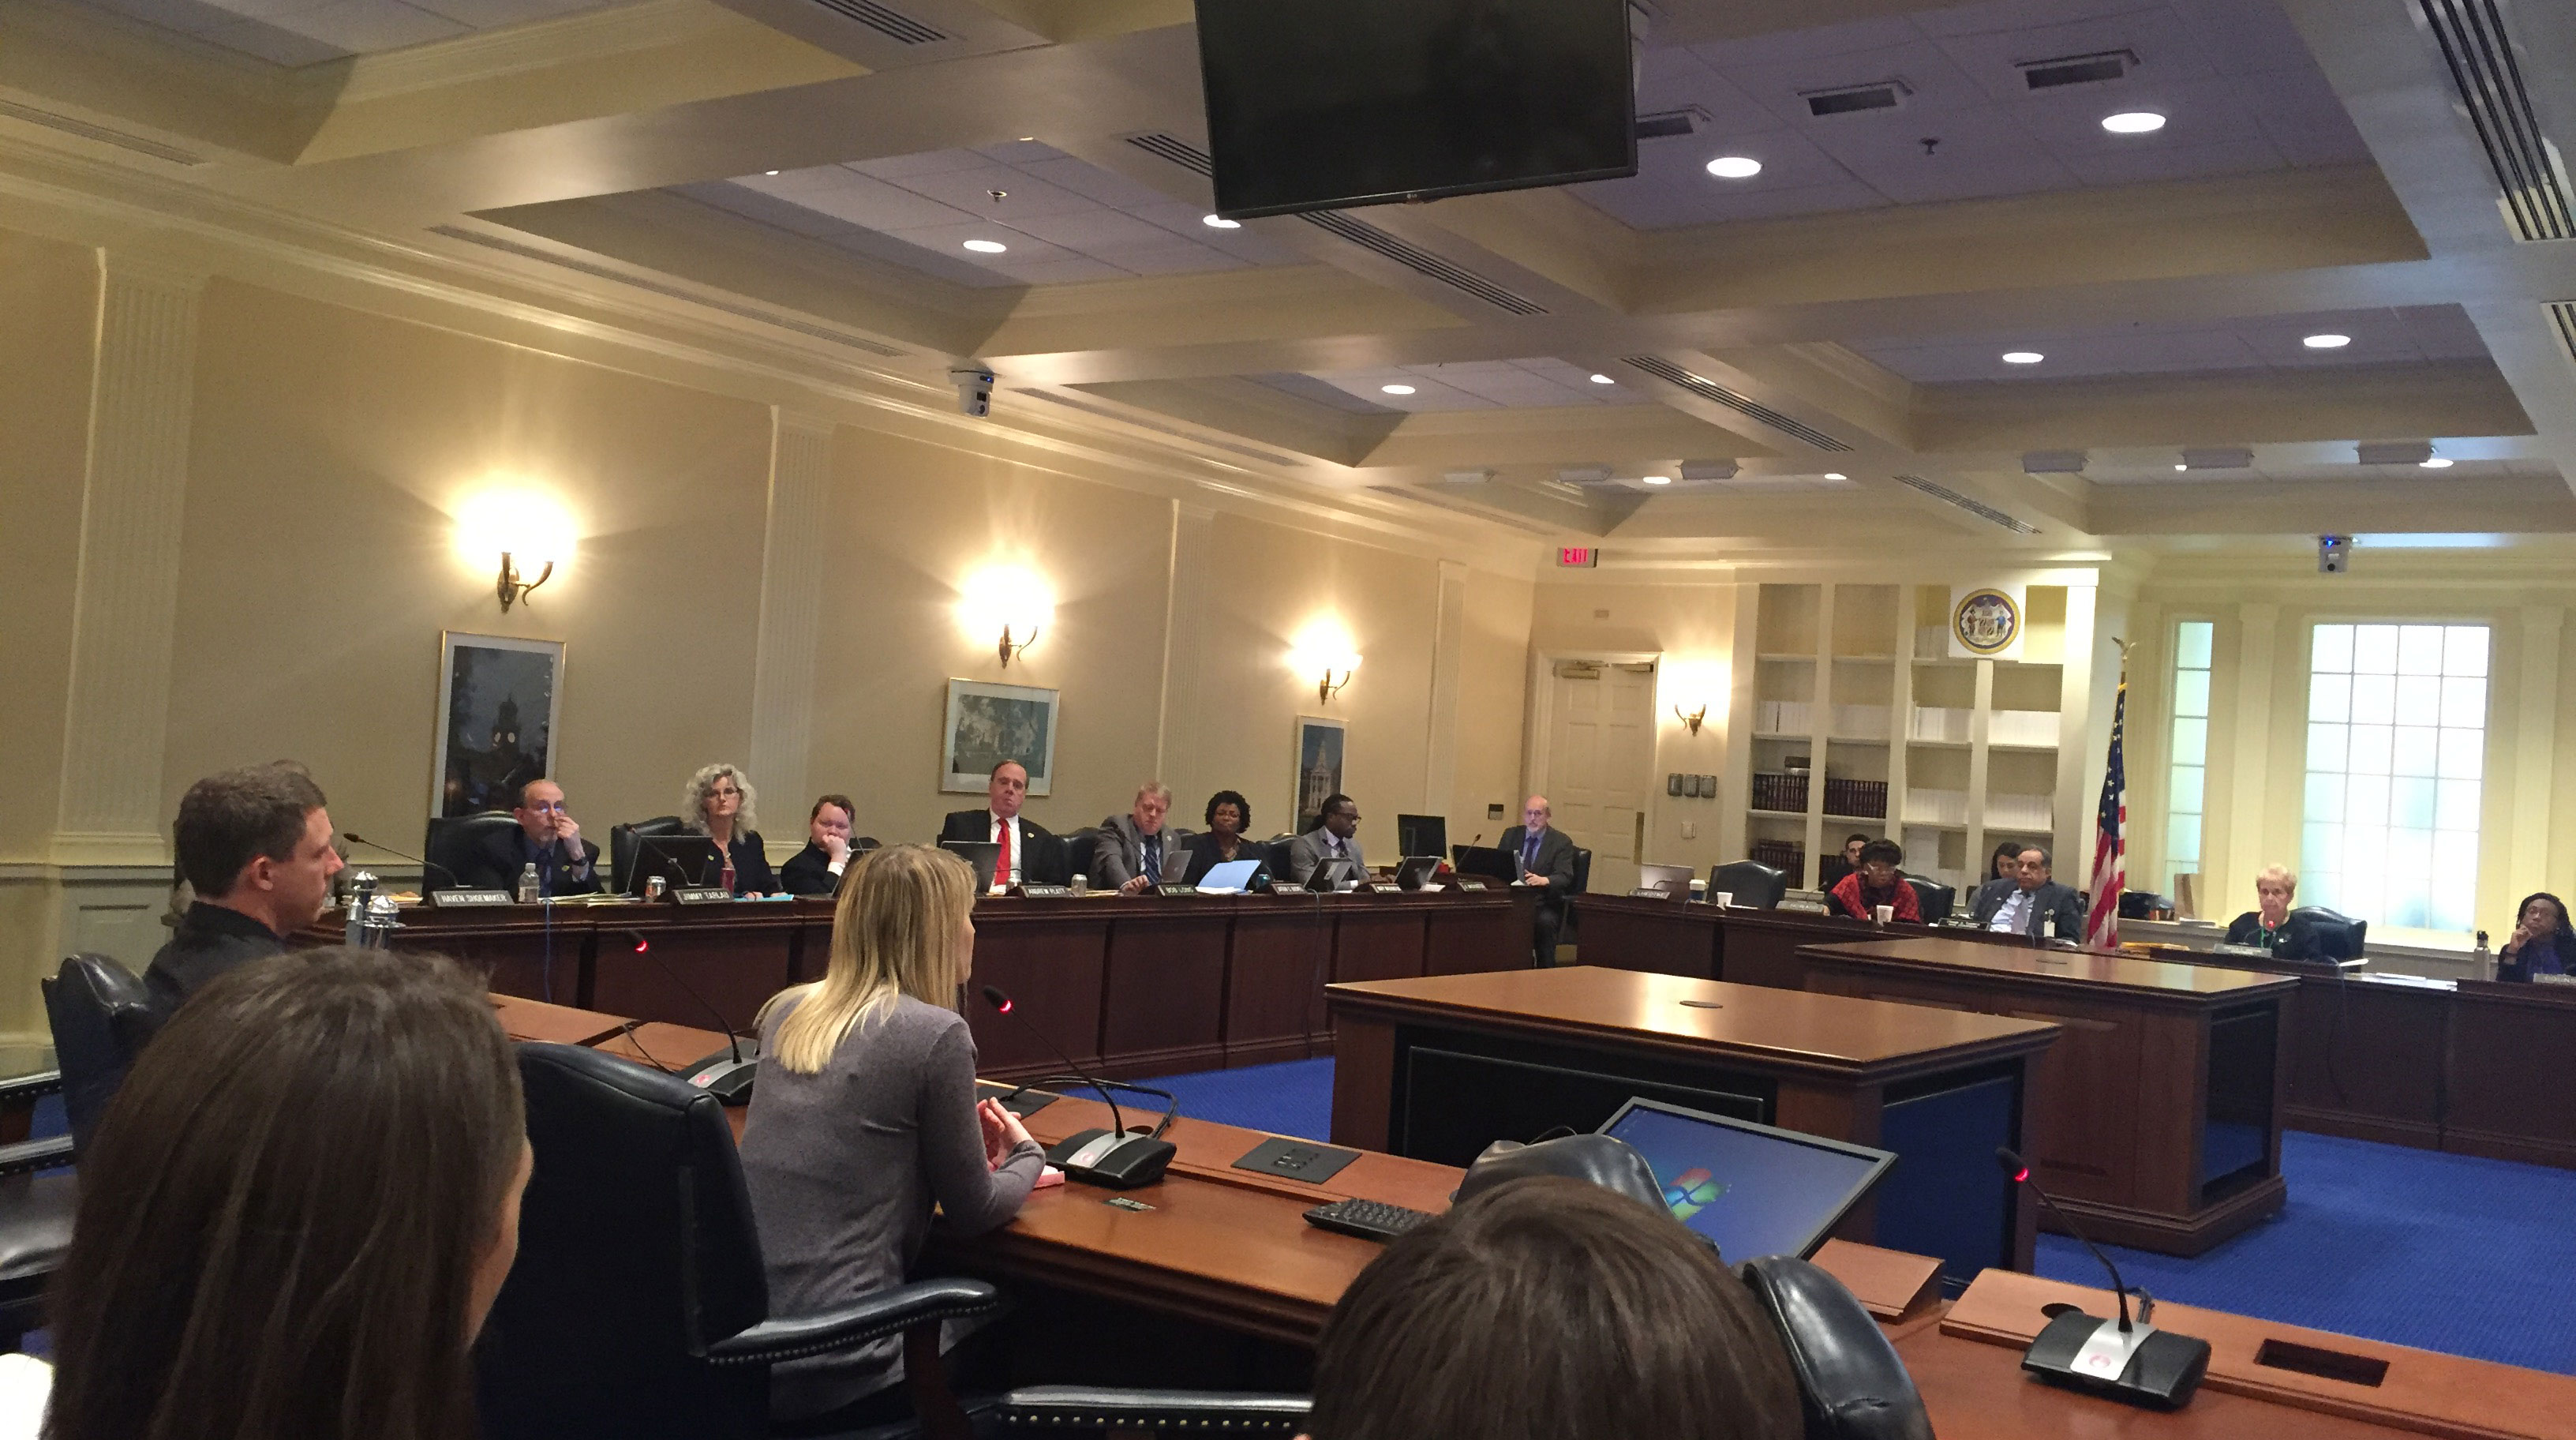 Sexual abuse survivor Erin Merryn testifies in support of a proposed Maryland bill that would require sexual abuse education in schools. (Capital News Service photo by Lexie Schapitl.)